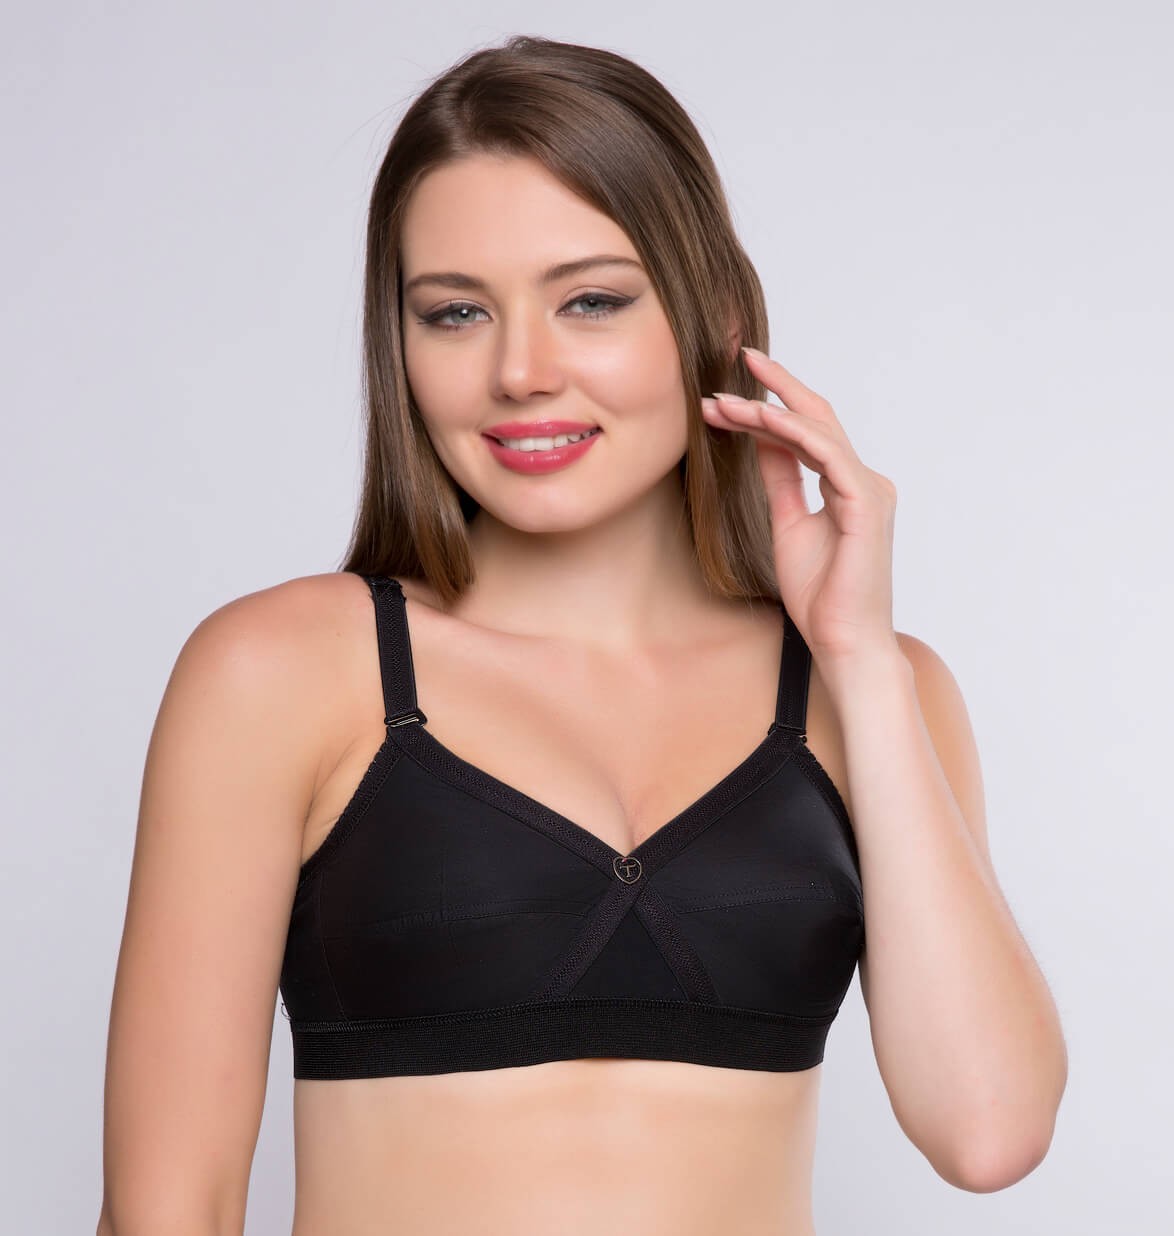 Trylo Industries on Instagram: Looking good made easy, every day! The  Trylo Krutika Plain Bra is designed to accentuate your natural curvy shape,  while giving you the comfort of great support, perfect